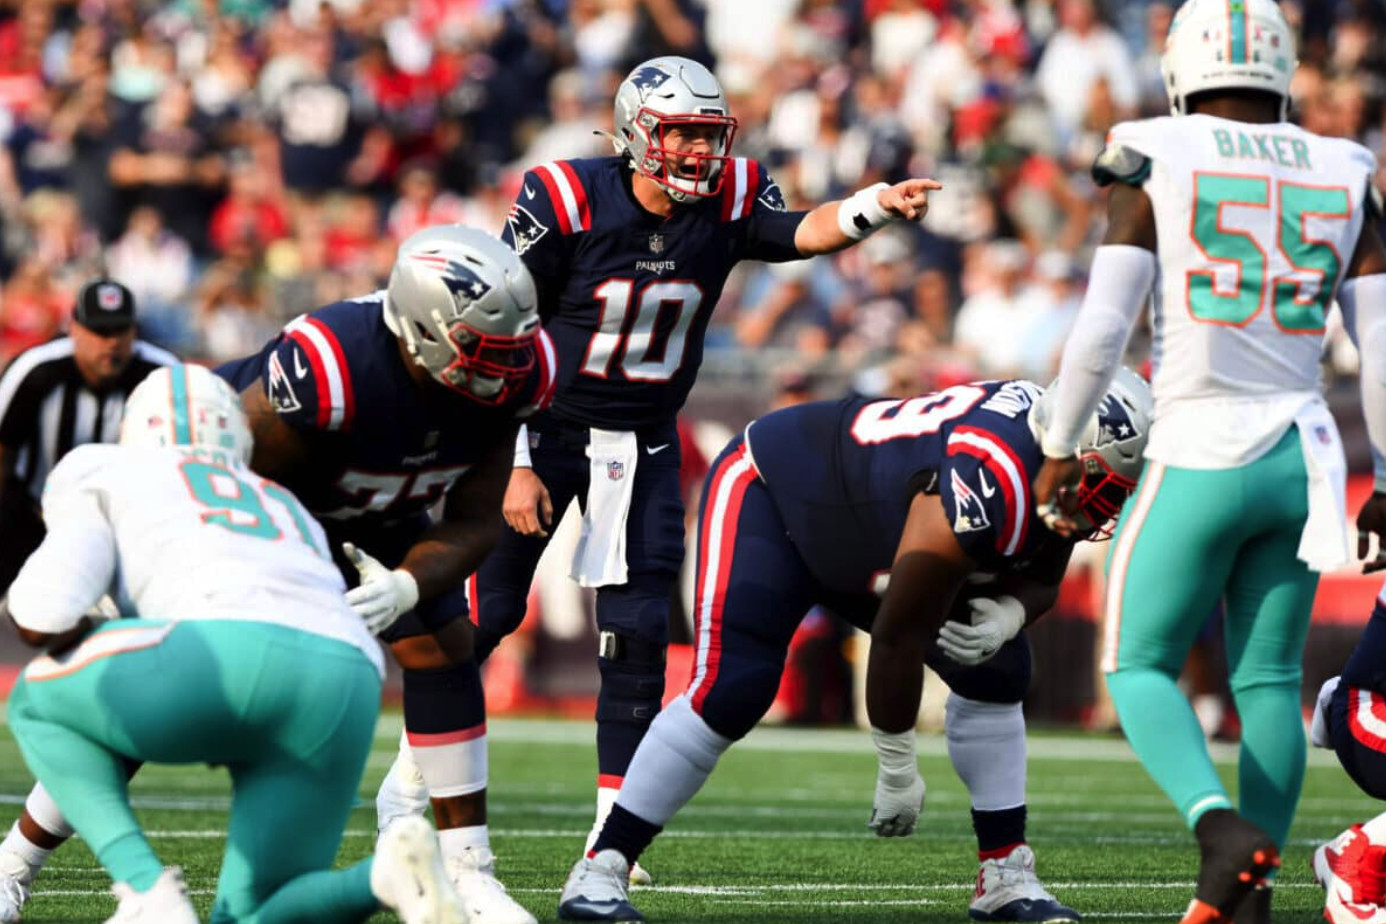 Why They Win New England Patriots at Miami Dolphins, Week 1 Sports